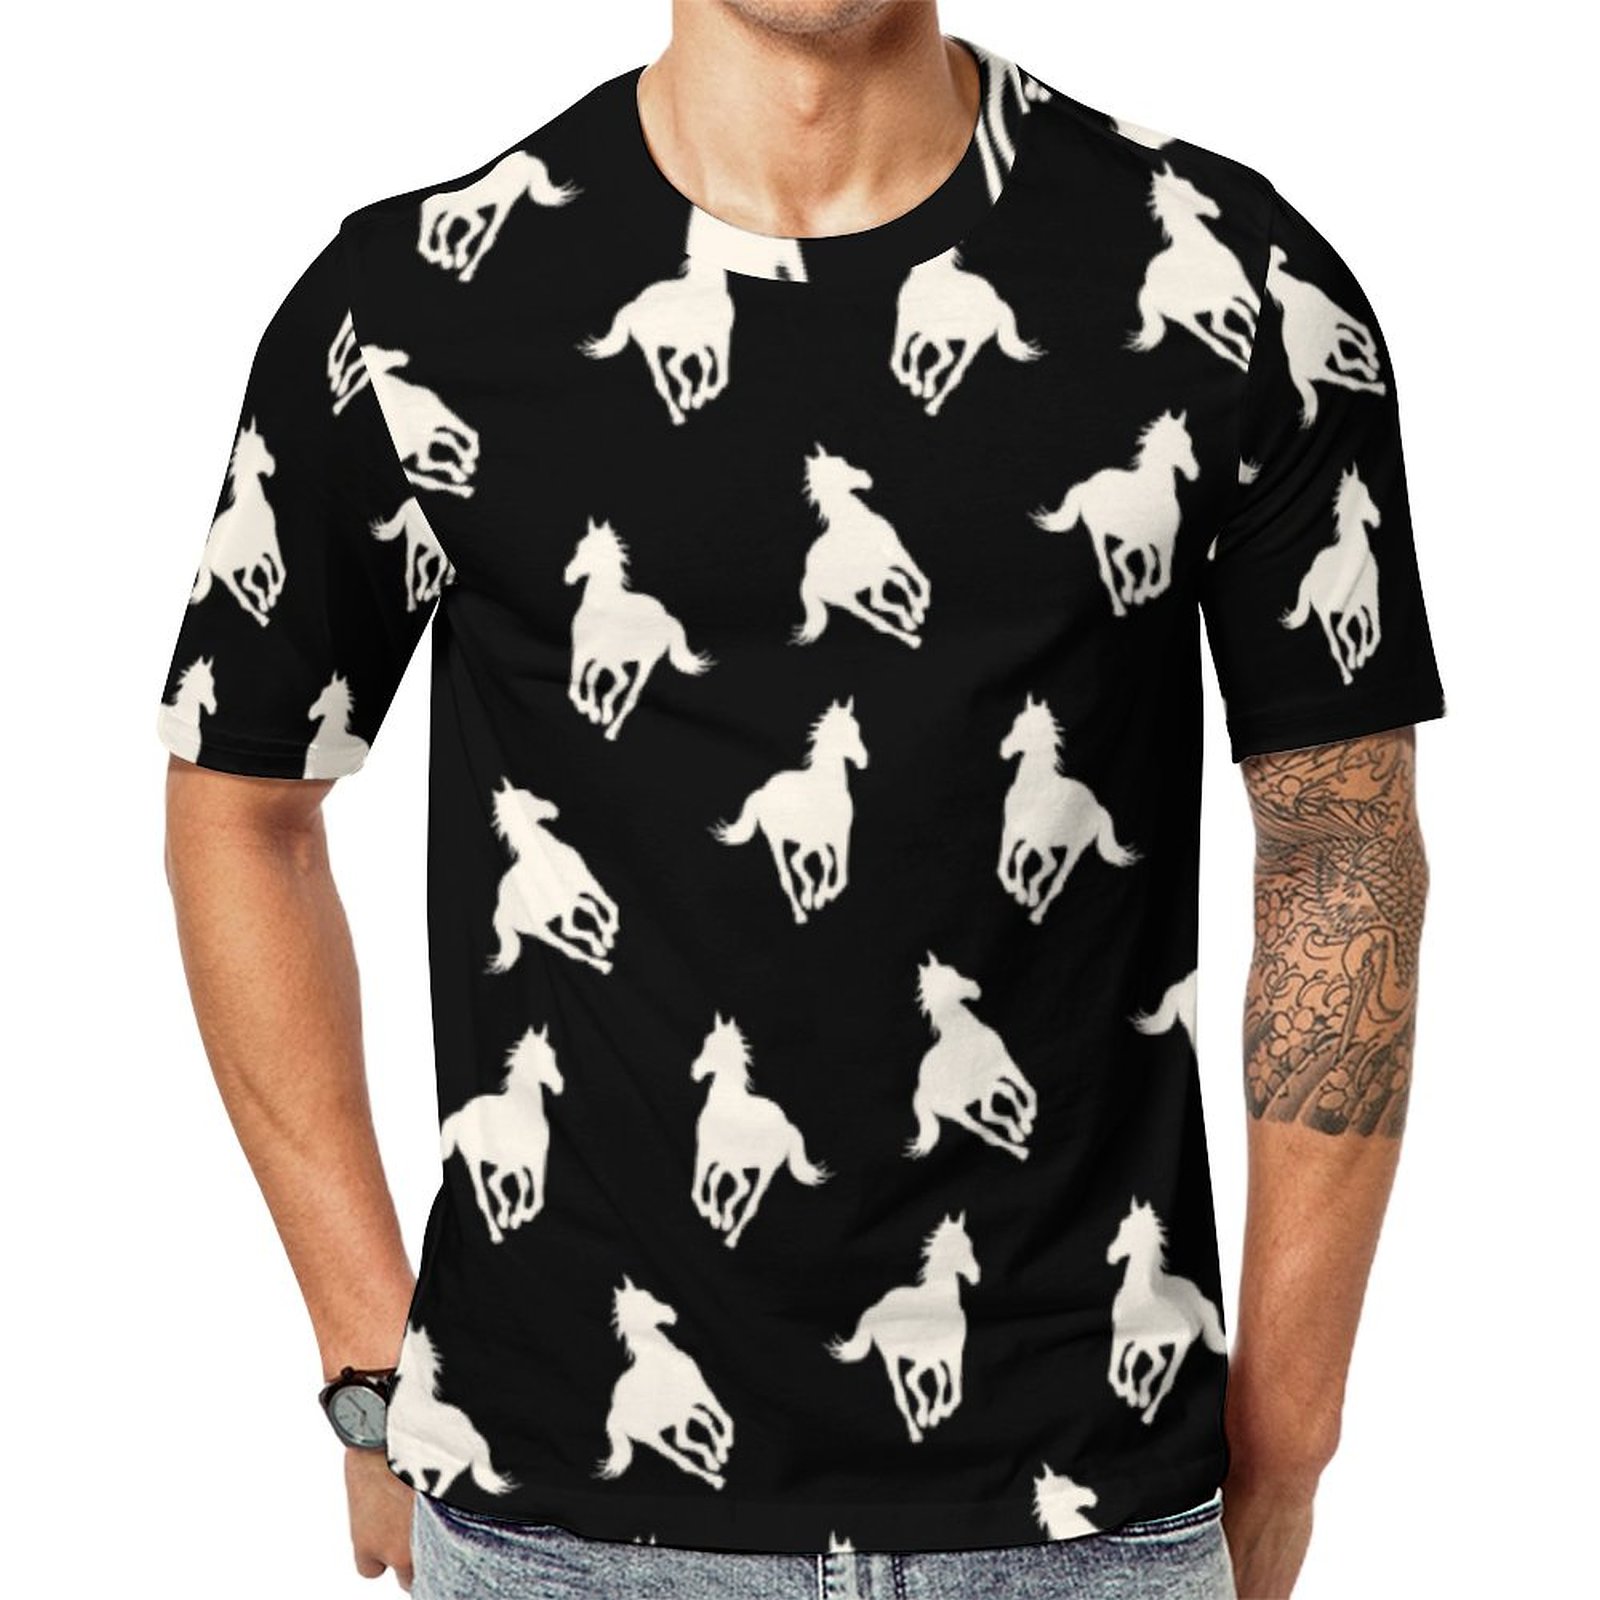 Galloping Horse Short Sleeve Print Unisex Tshirt Summer Casual Tees for Men and Women Coolcoshirts